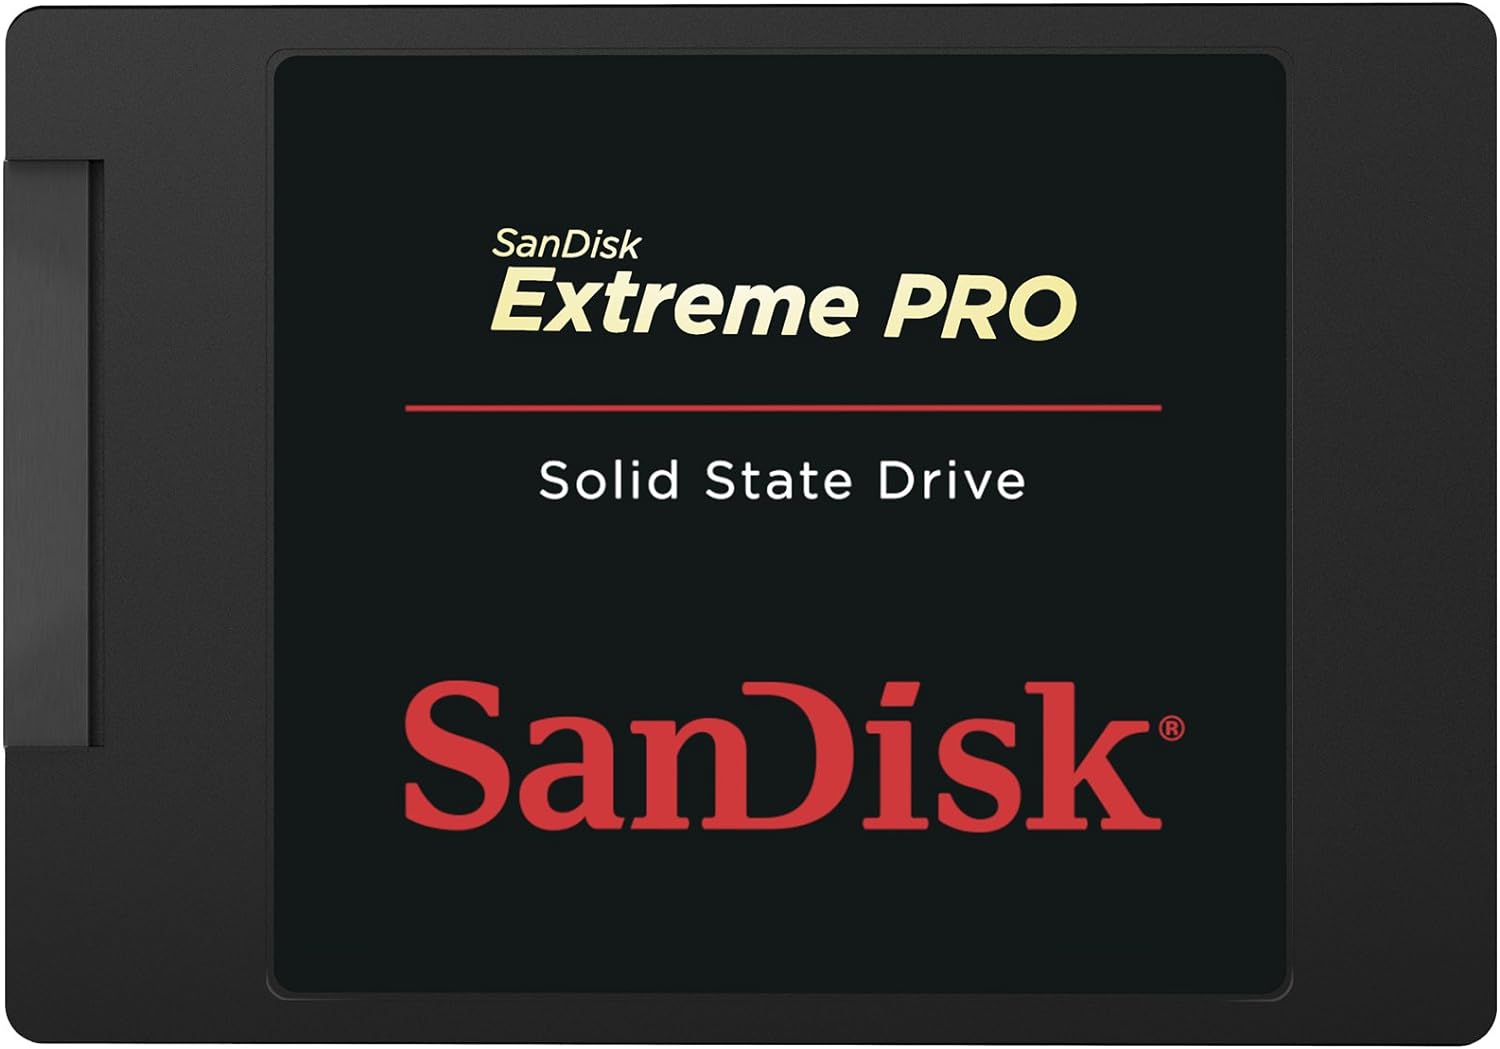 SanDisk Extreme PRO 960GB SATA 6.0GB/s 2.5-Inch 7mm Height Solid State Drive (SSD) with 10-Year Warranty- SDSSDXPS-960G-G25